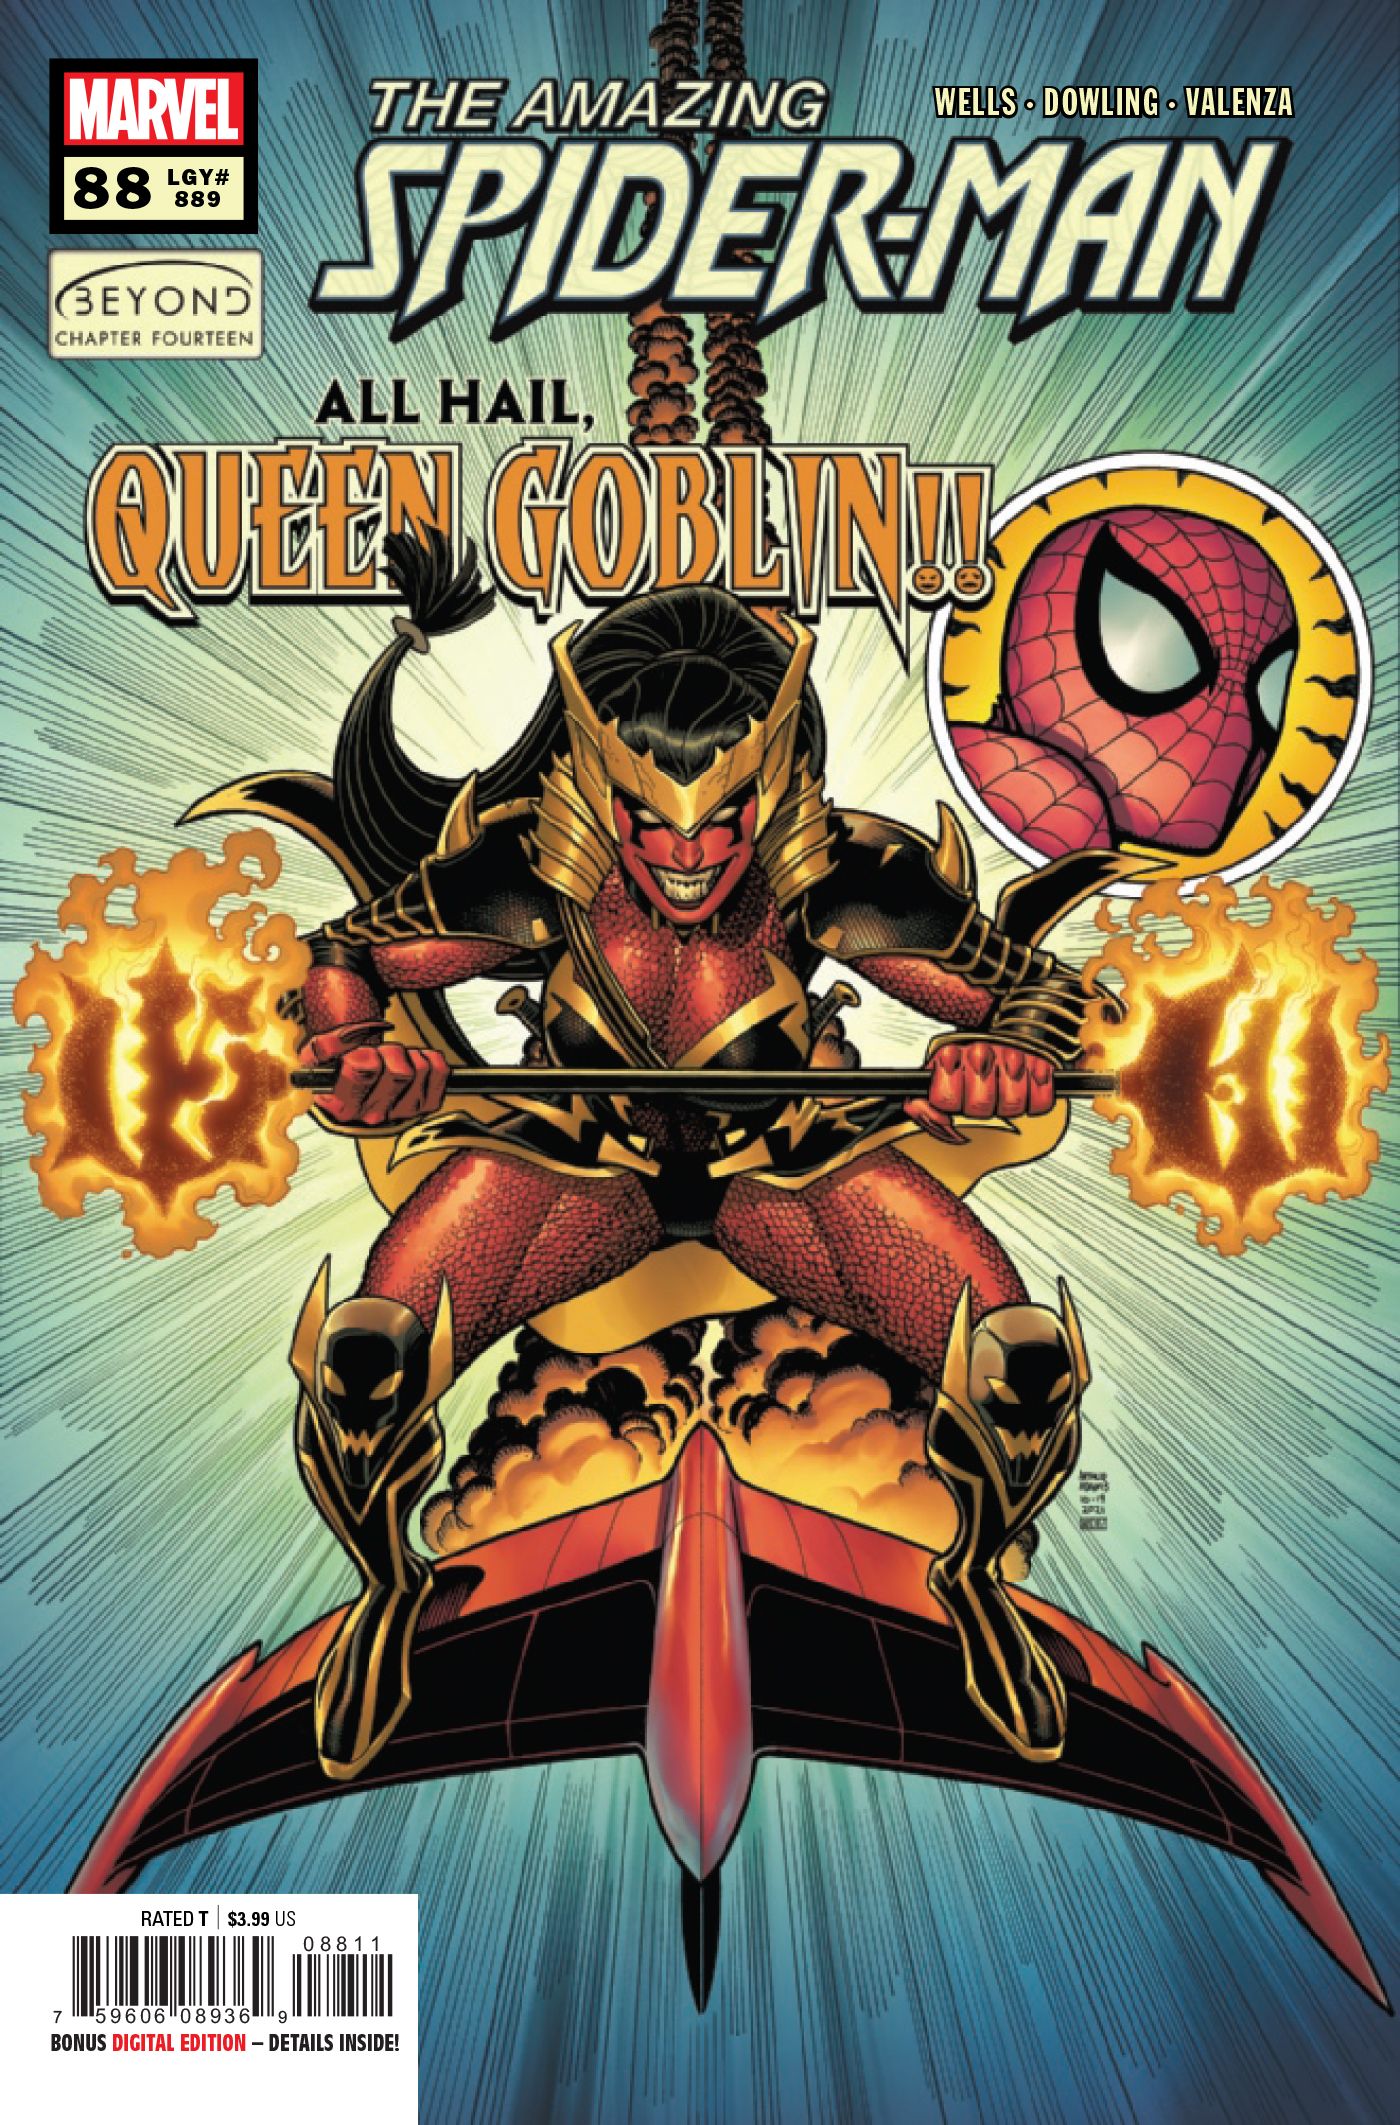 Queen Goblin soars across the main cover for Amazing Spider-Man #88.